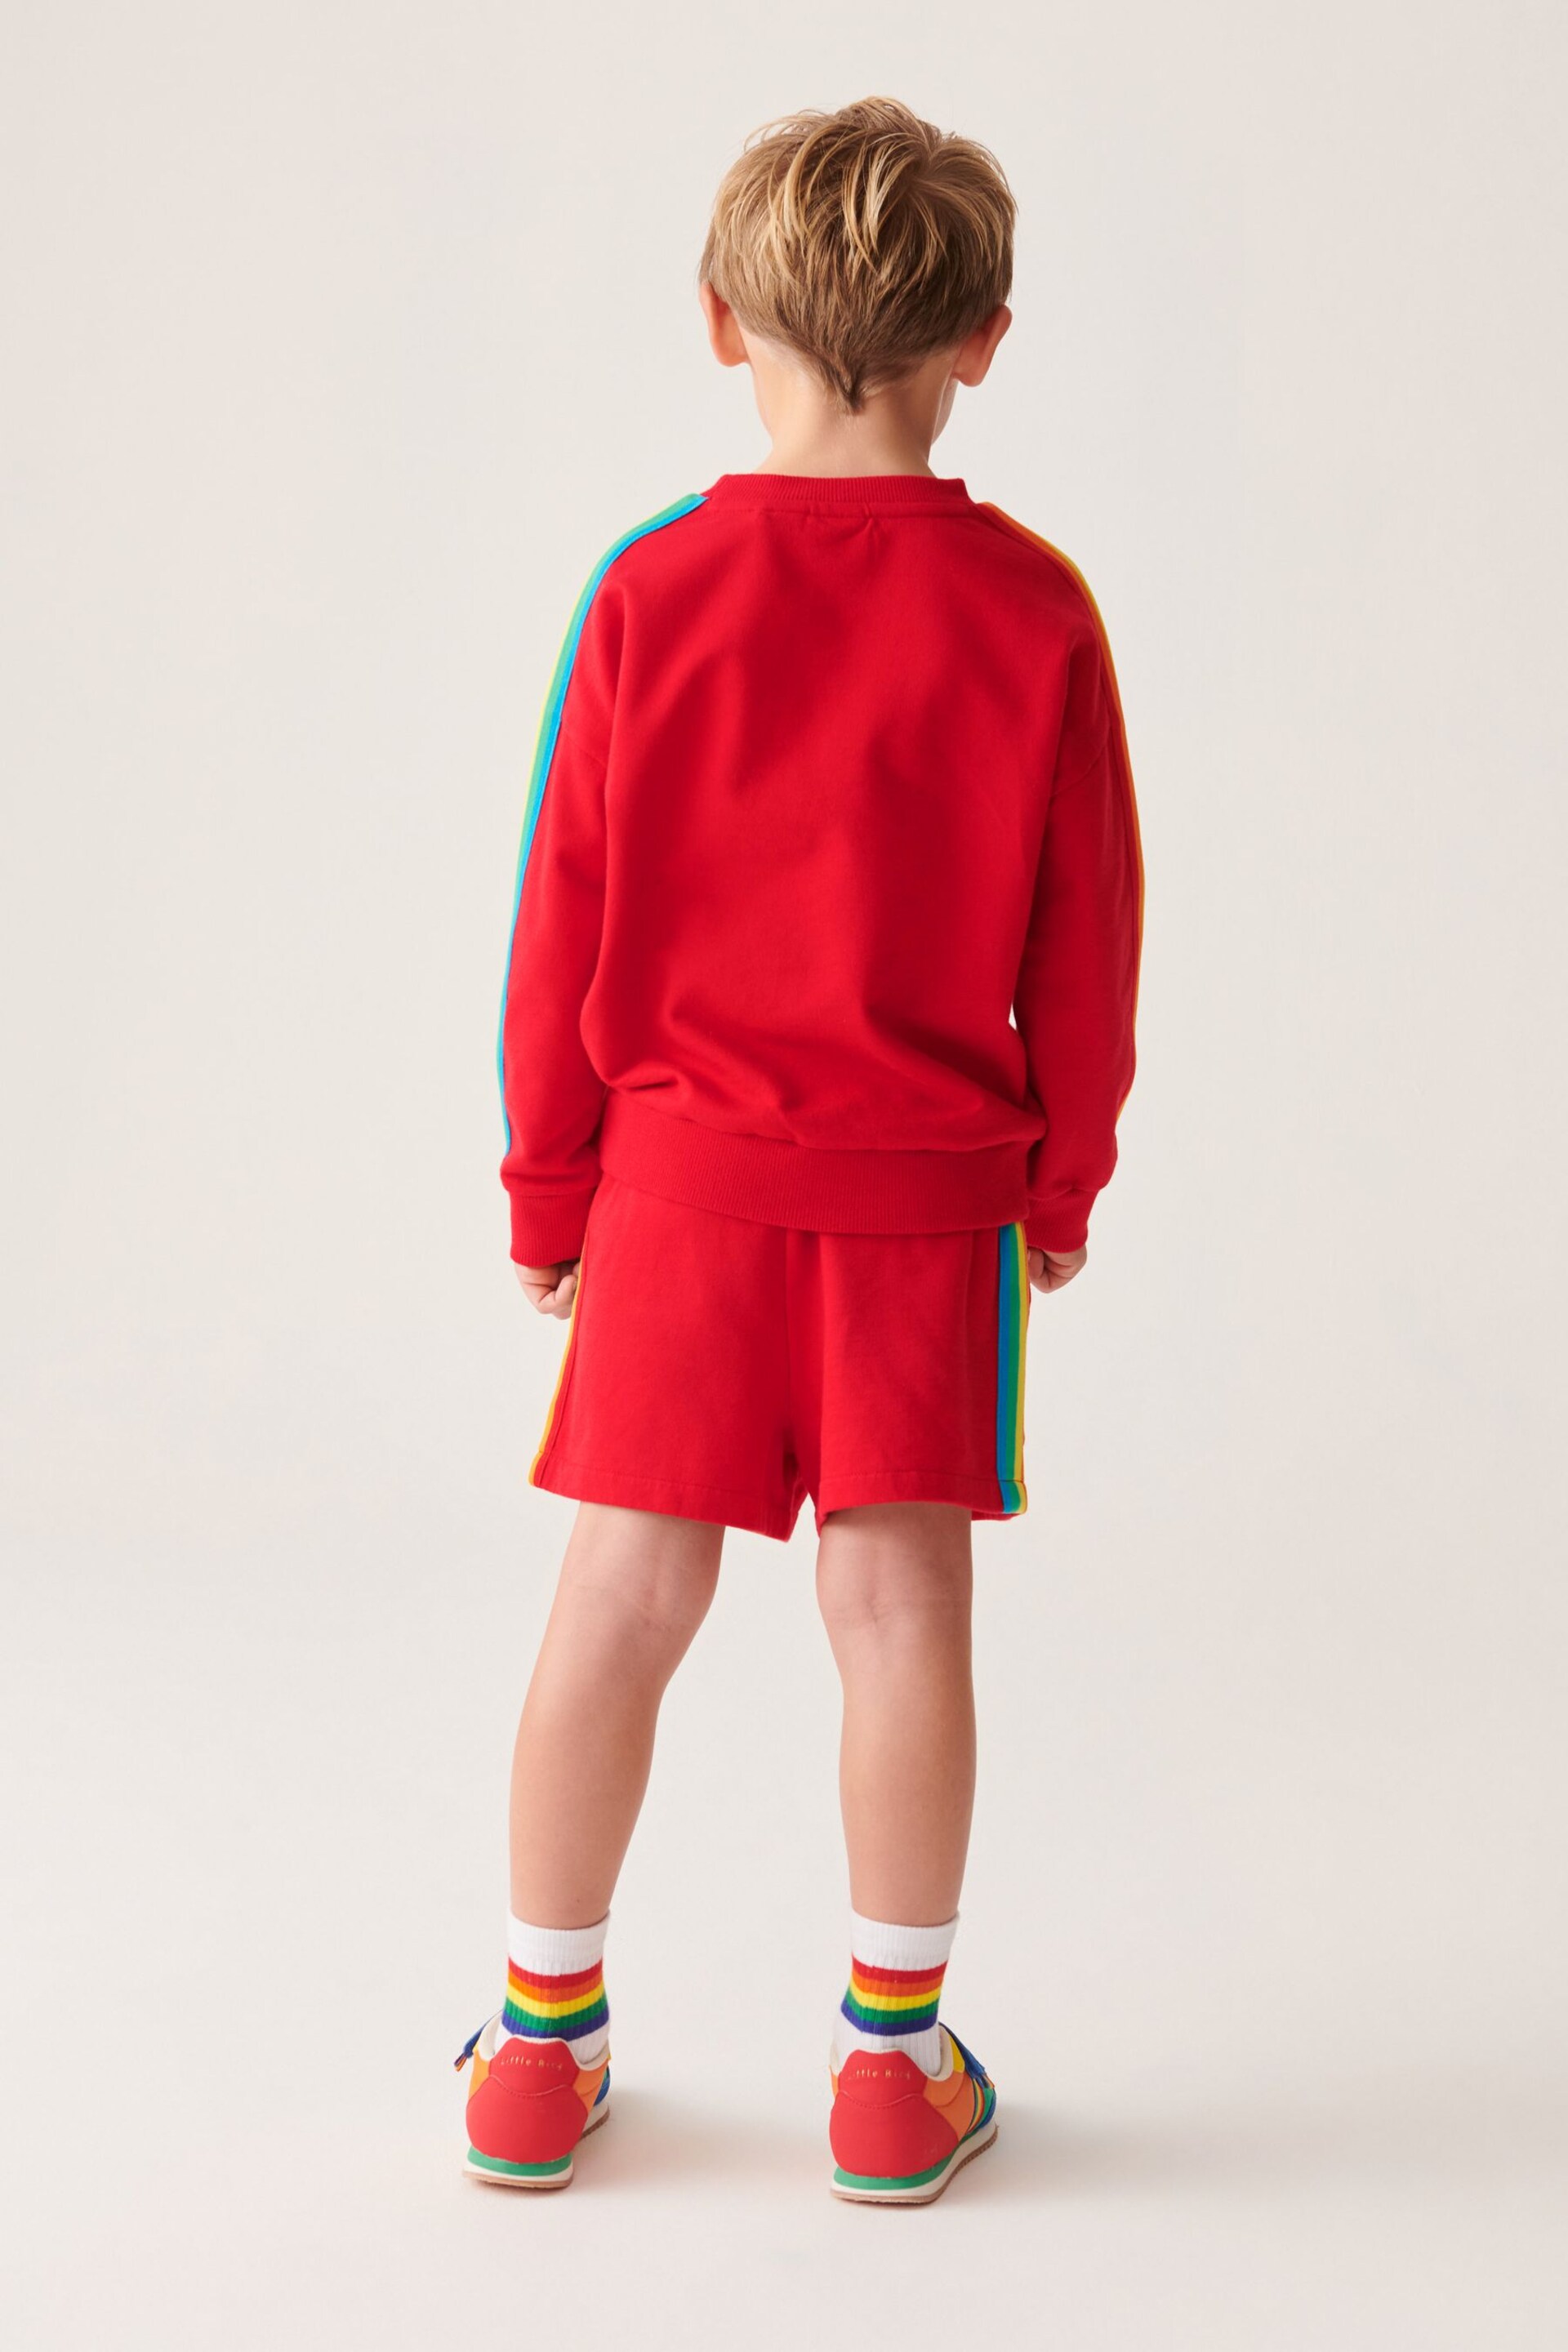 Little Bird by Jools Oliver Red Rainbow Sweat Top and Short Set - Image 4 of 14